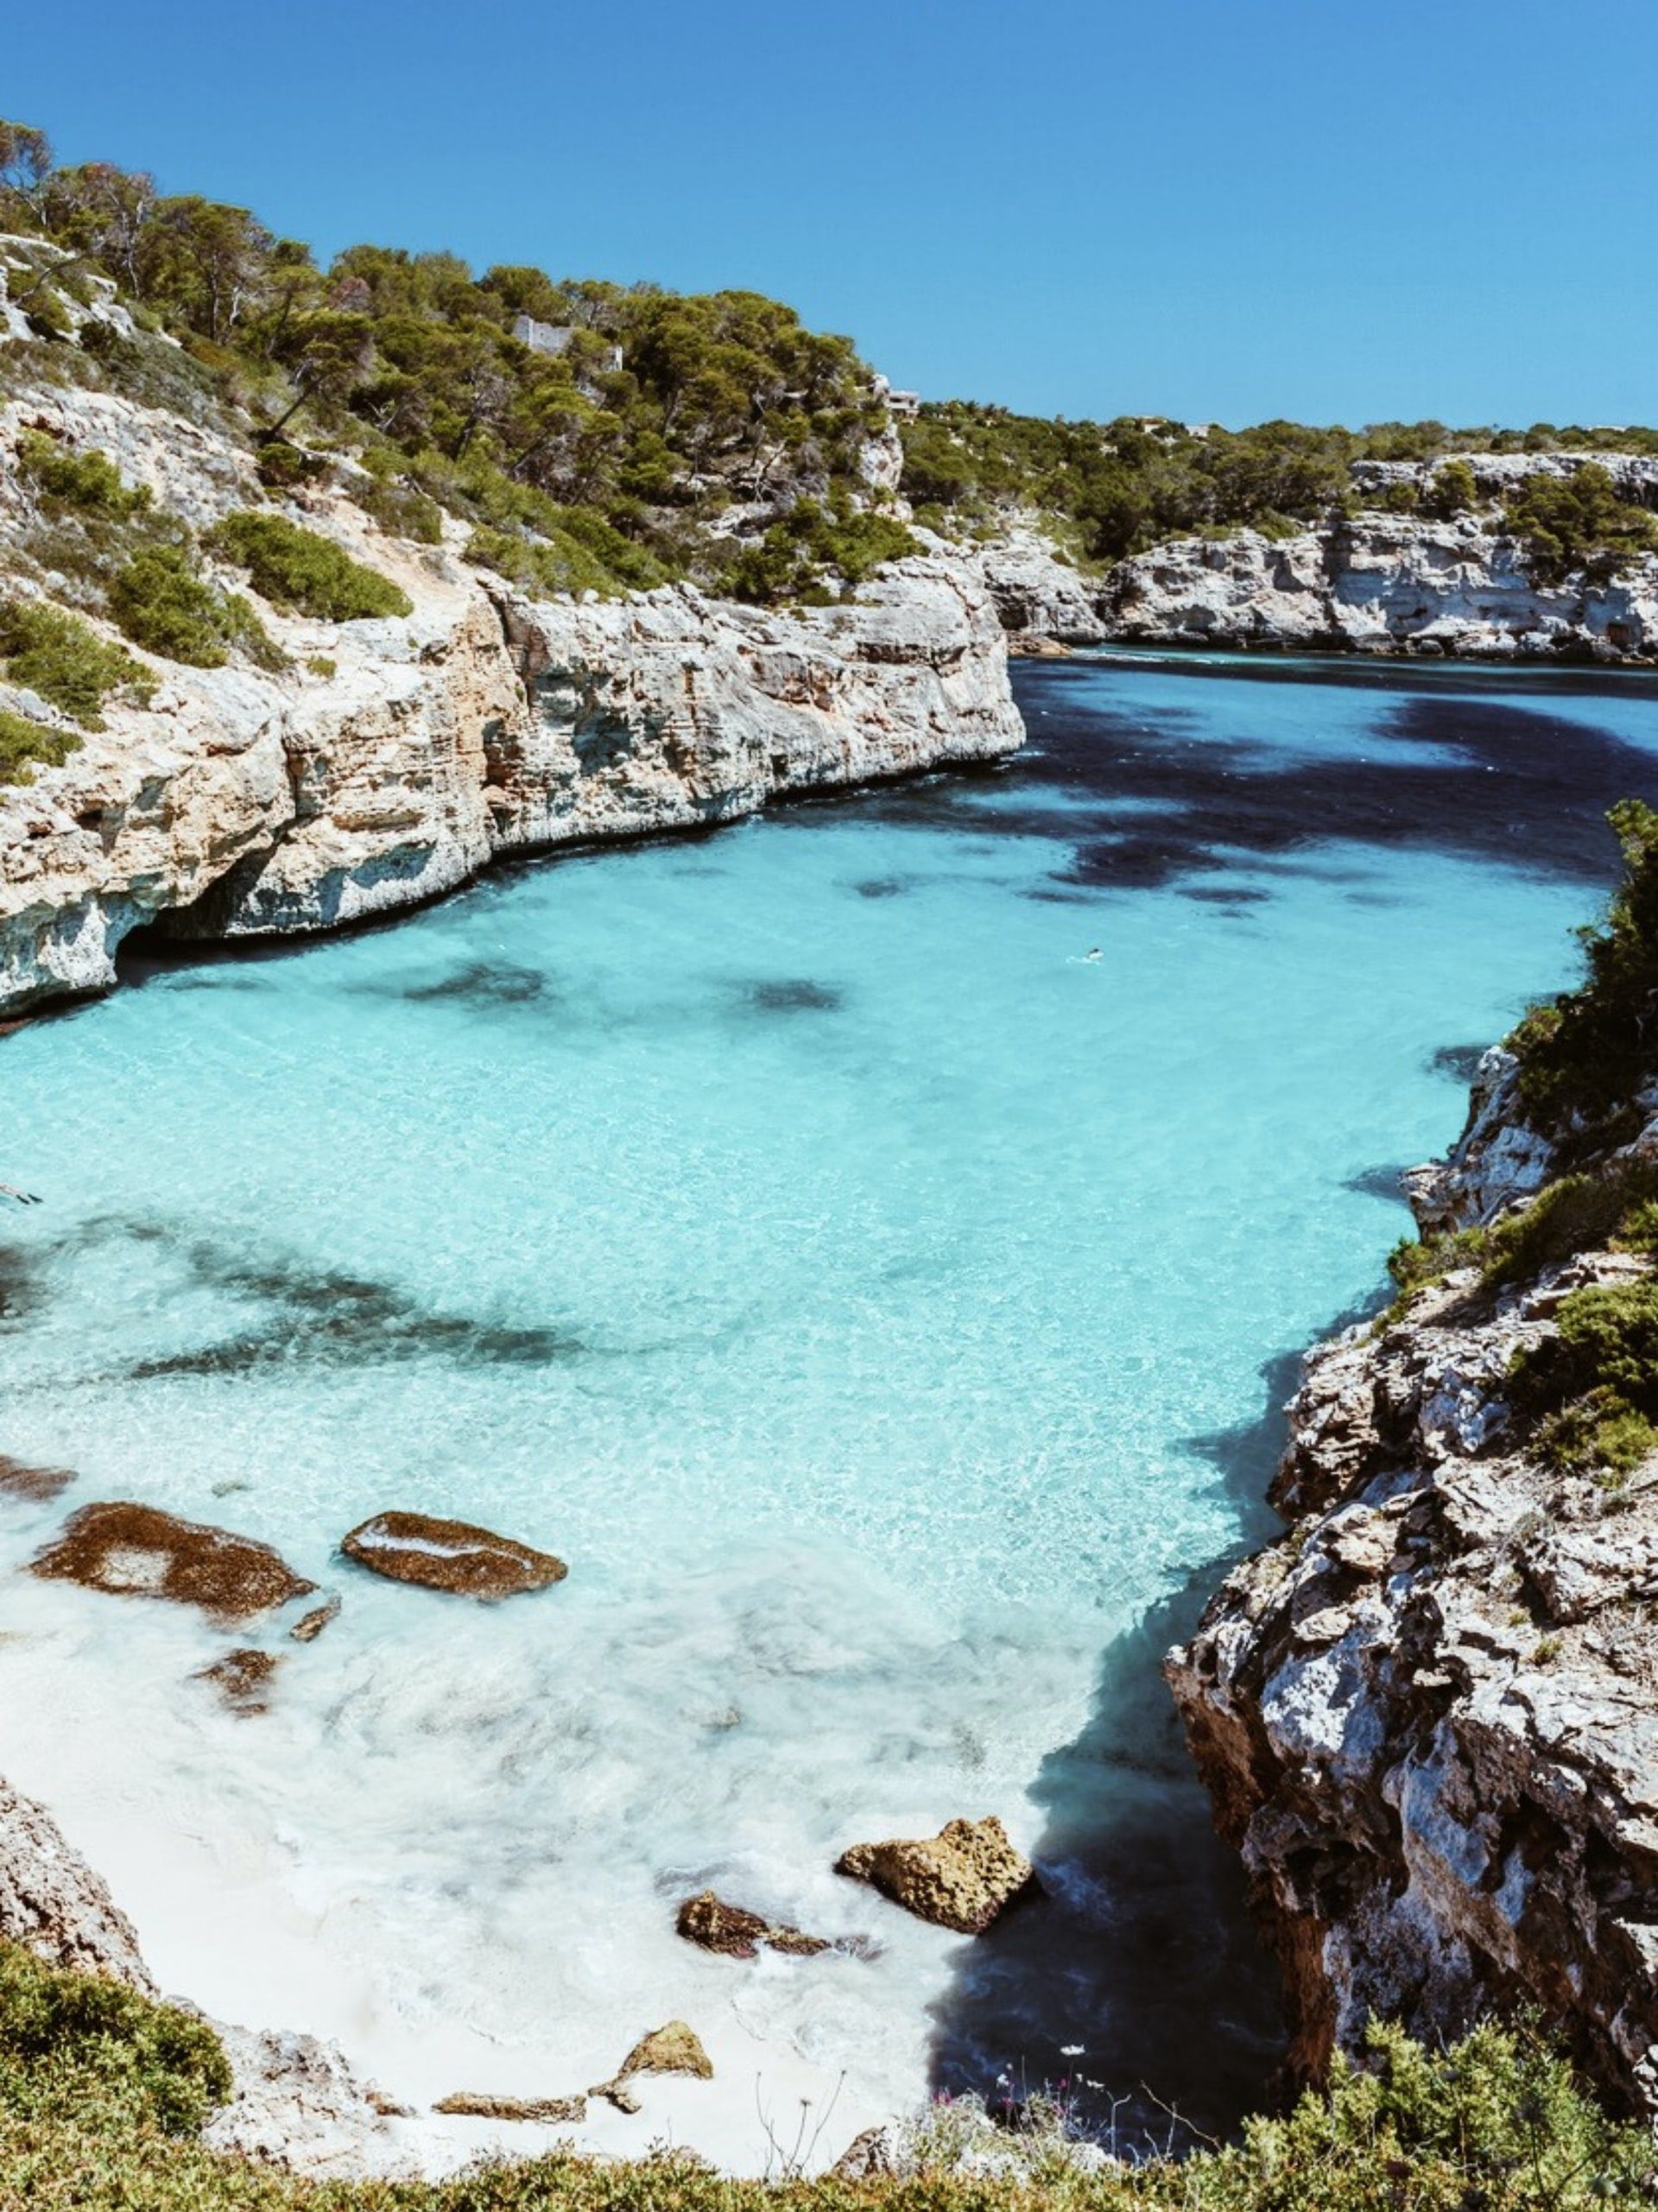 Buying property in Mallorca - image by Reiseuhu